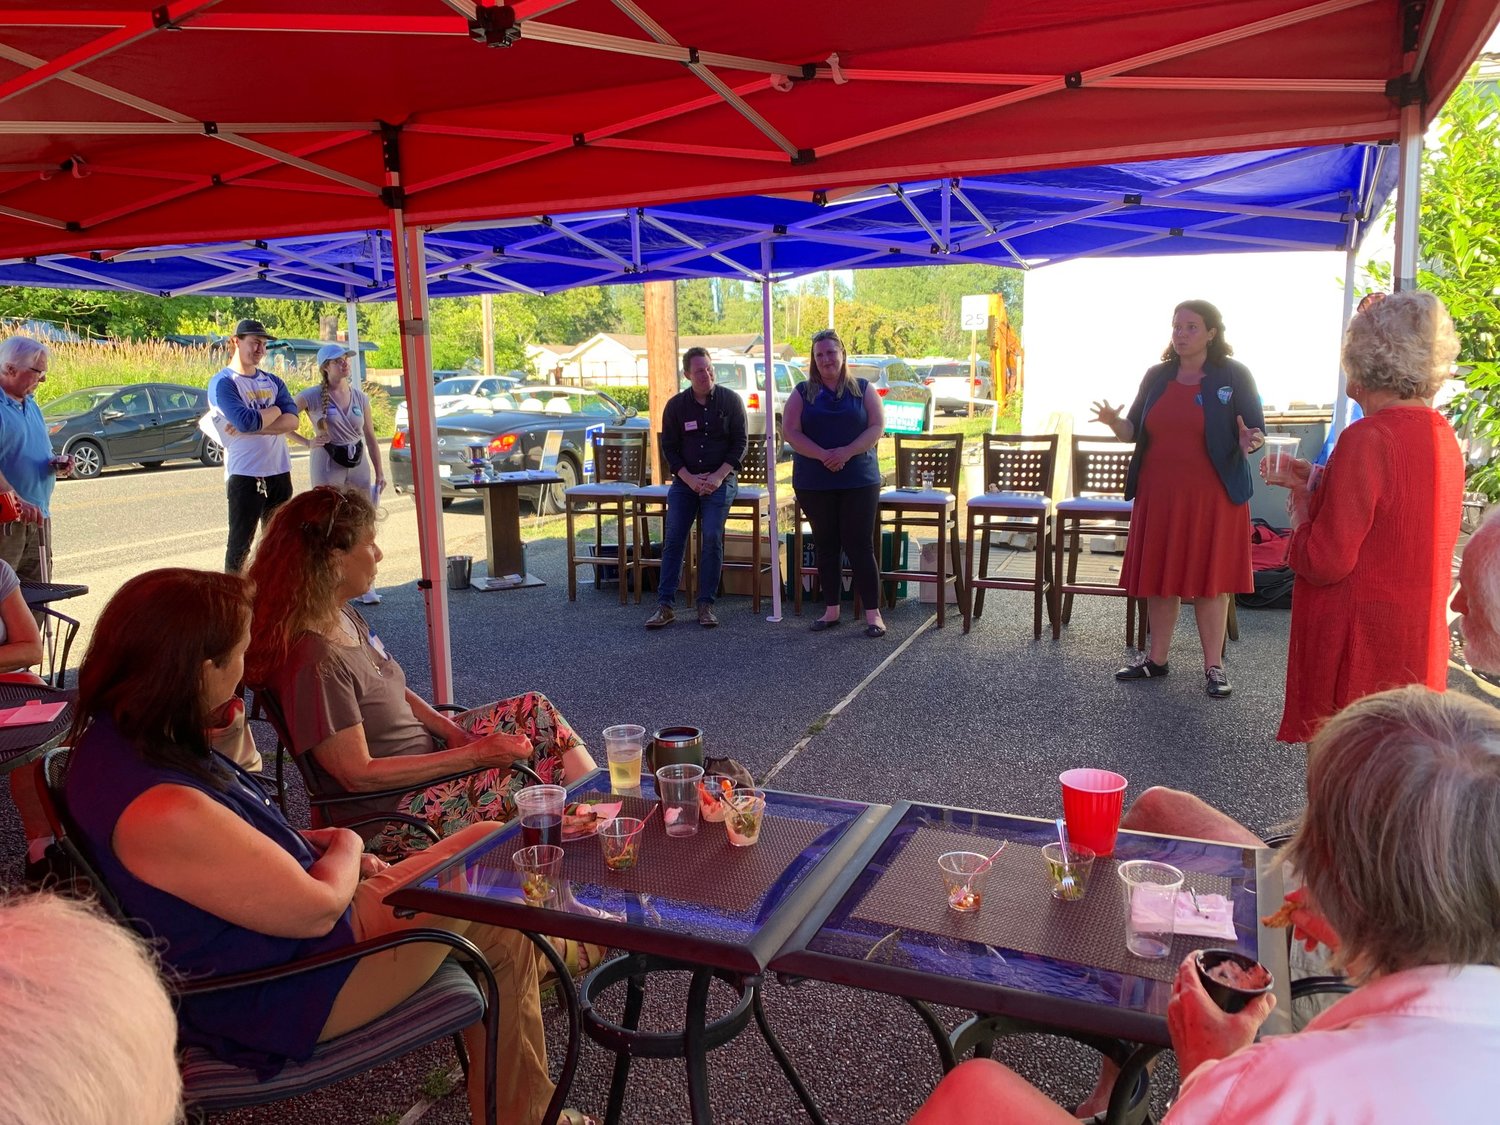 42nd District Democrats came to Point Roberts on July 12, 2022 for a meet and greet at Saltwater Cafe.